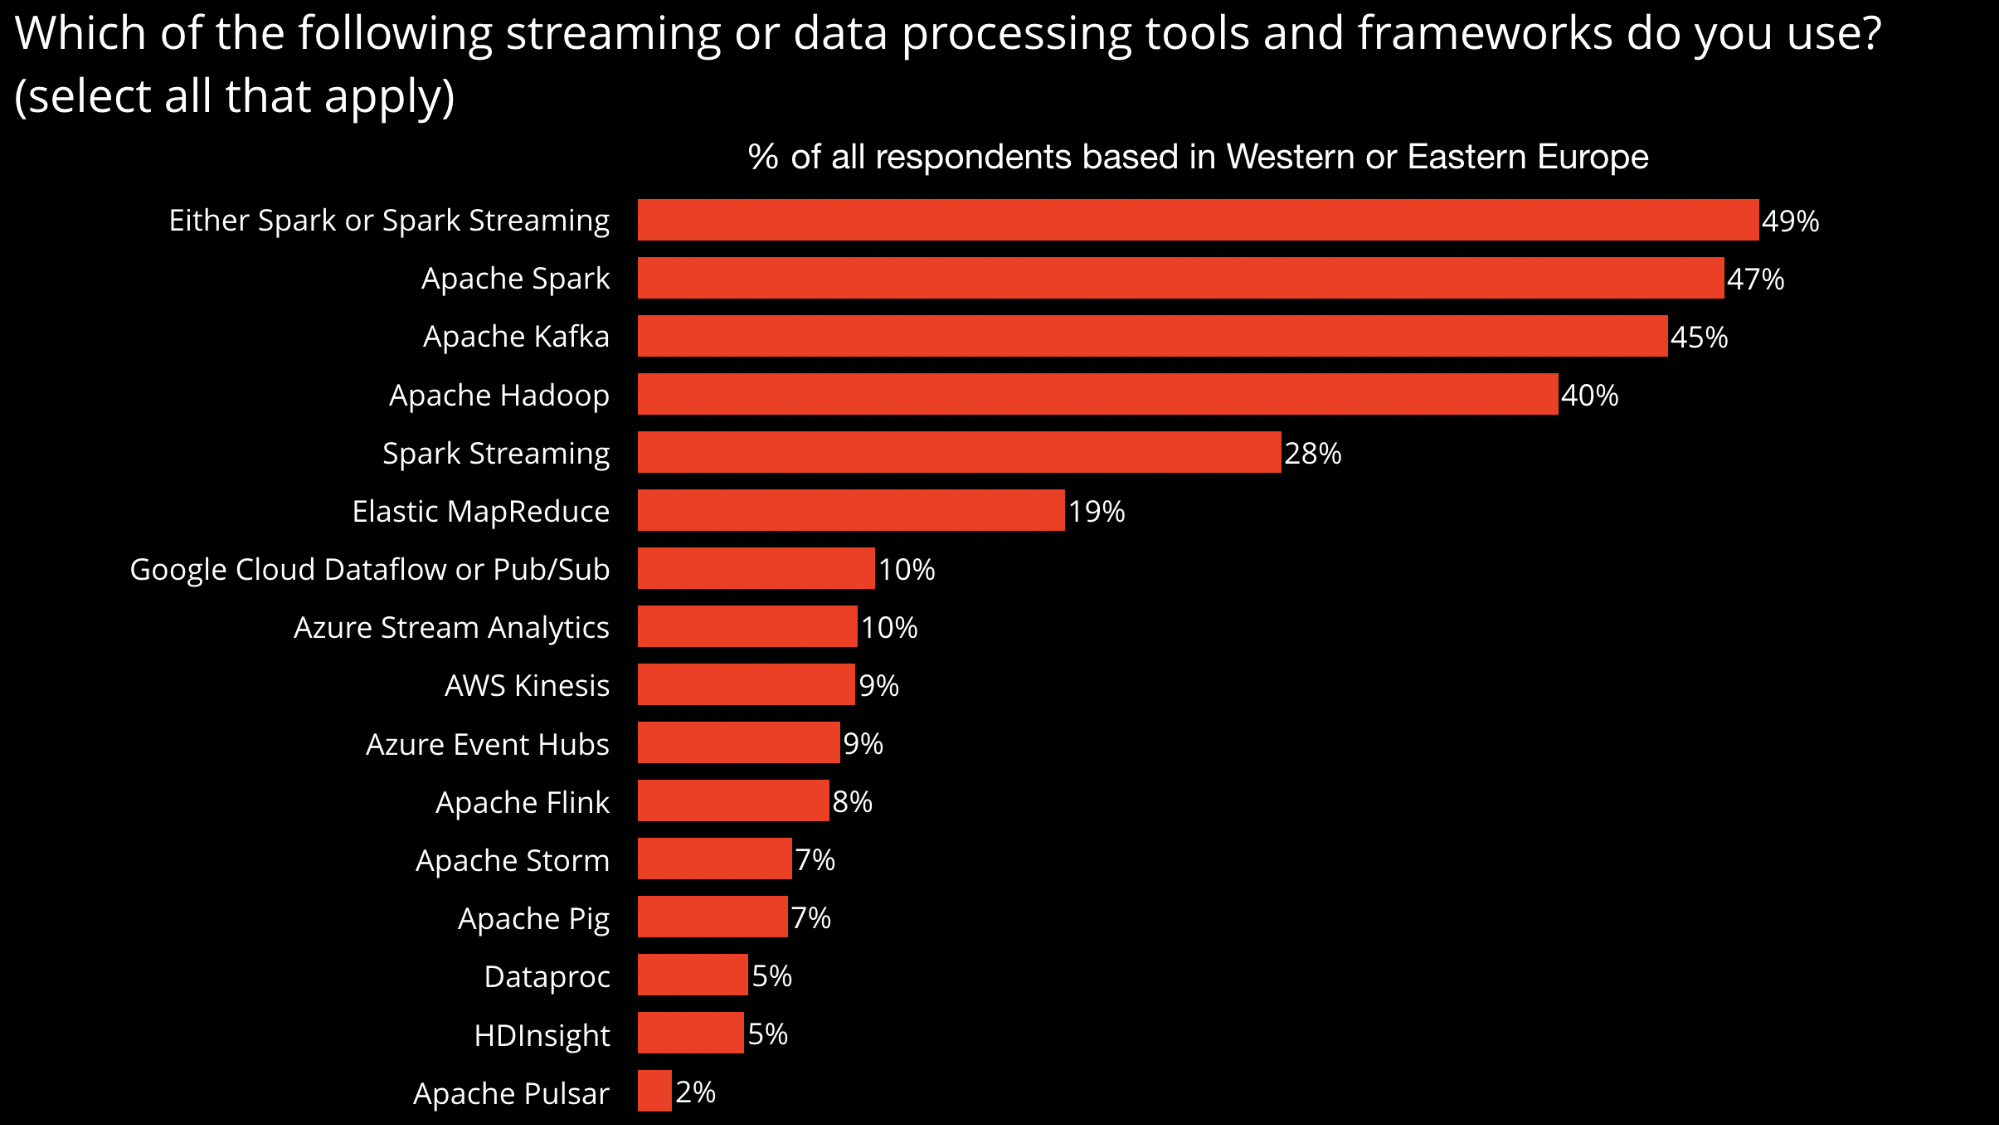 popular (batch and streaming) data processing tools used by respondents based in Europe